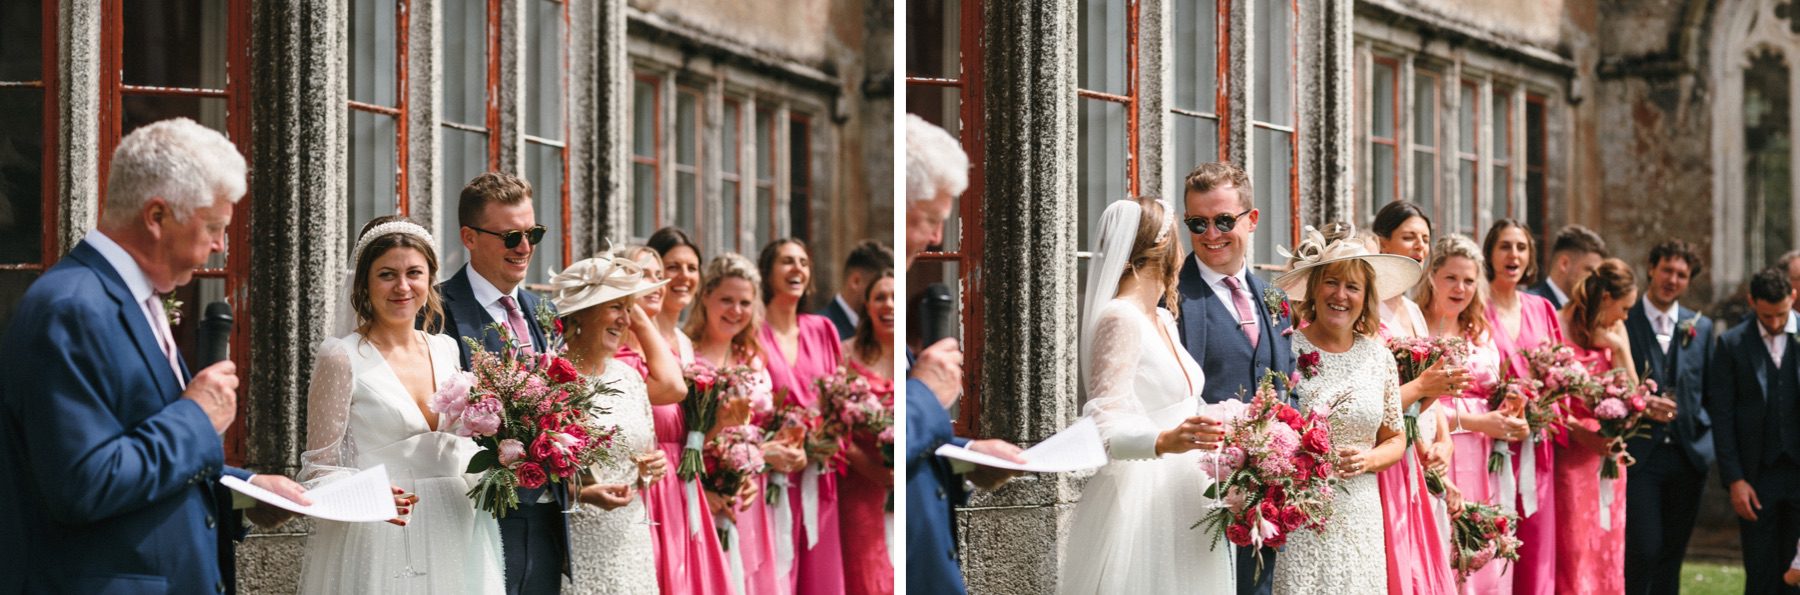 Relaxed and colourful wedding photography at Trelowarren estate in Cornwall